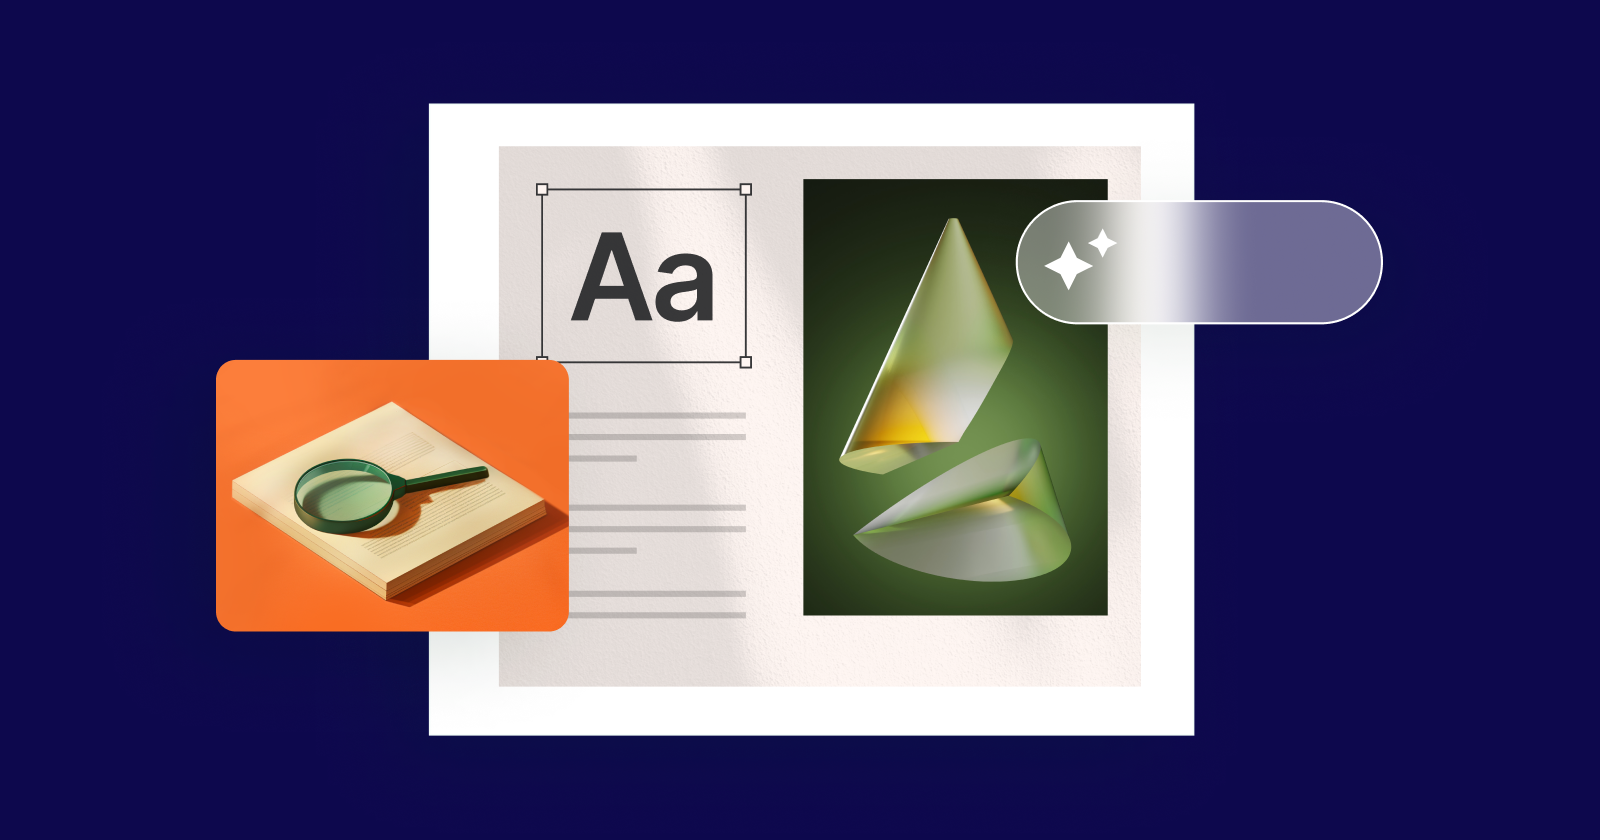 Collage of high-quality graphic design elements including a paper with text and a magnifying glass, a styled letter 'aa,' and 3D geometric shapes on a dark blue background.